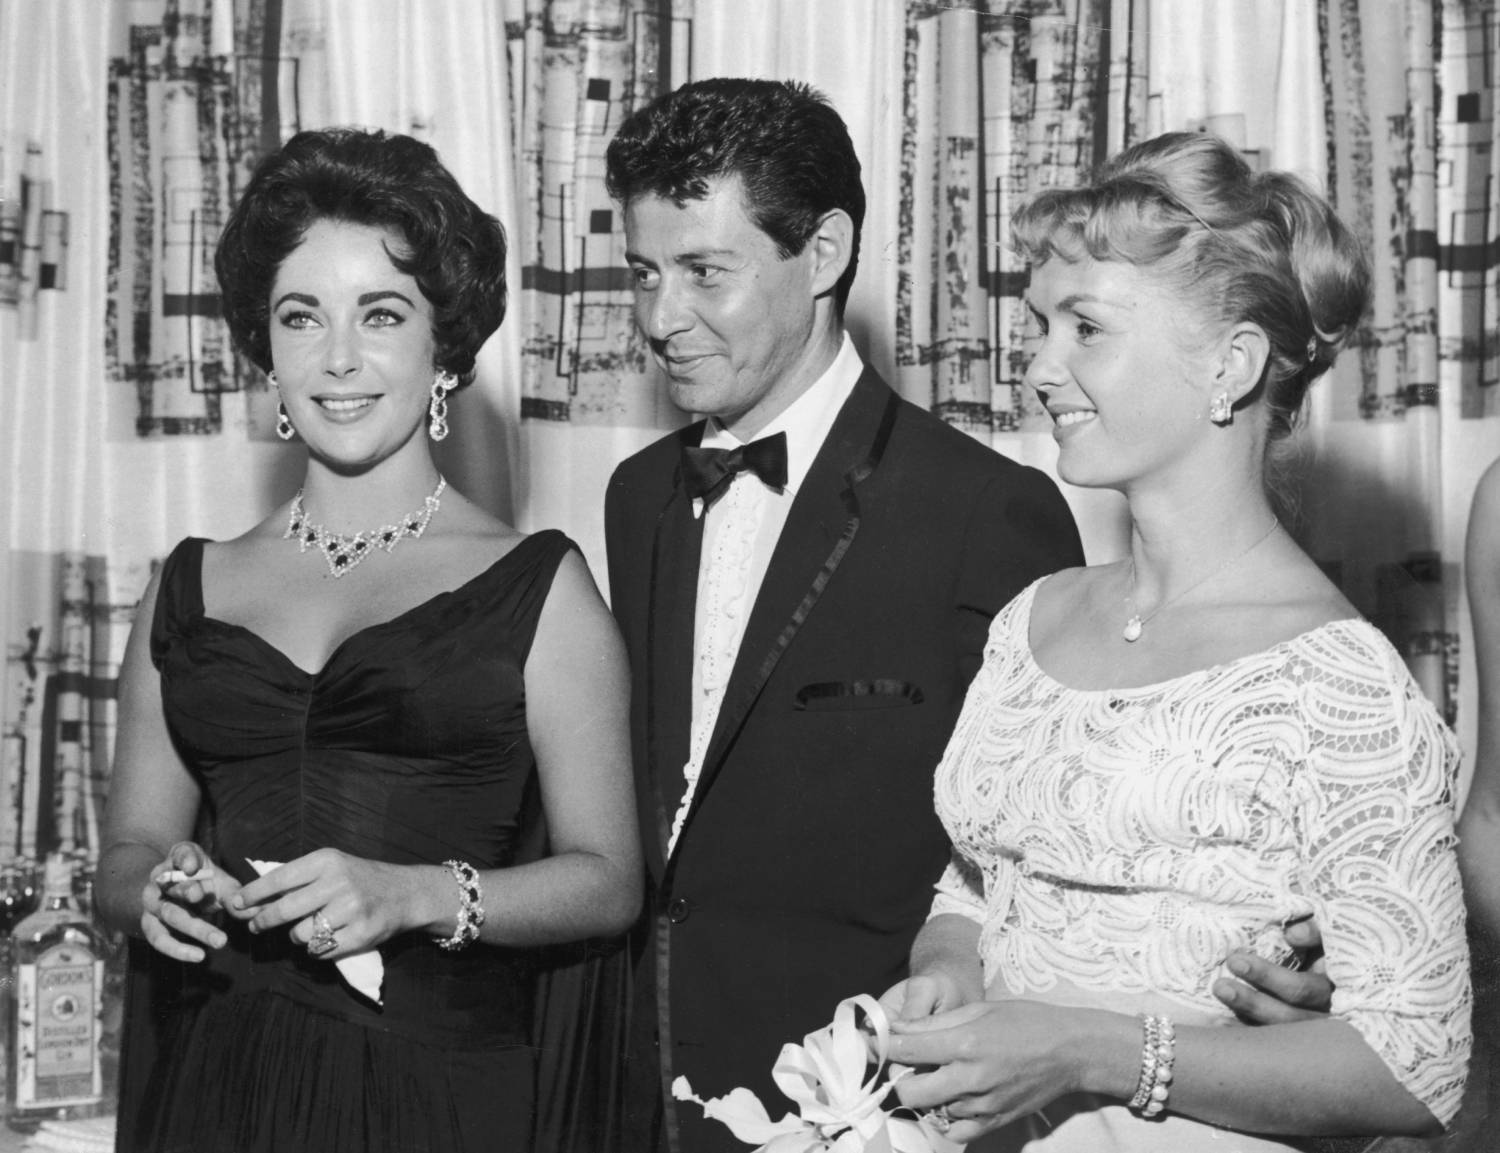 American singer Eddie Fisher, wearing a tuxedo, stands with arm around his wife, American actor Debbie Reynolds (R) and smiles while looking at British-born actor Elizabeth Taylor, smoking a cigarette, Las Vegas, Nevada. The next year Fisher left Reynolds and married Taylor. 